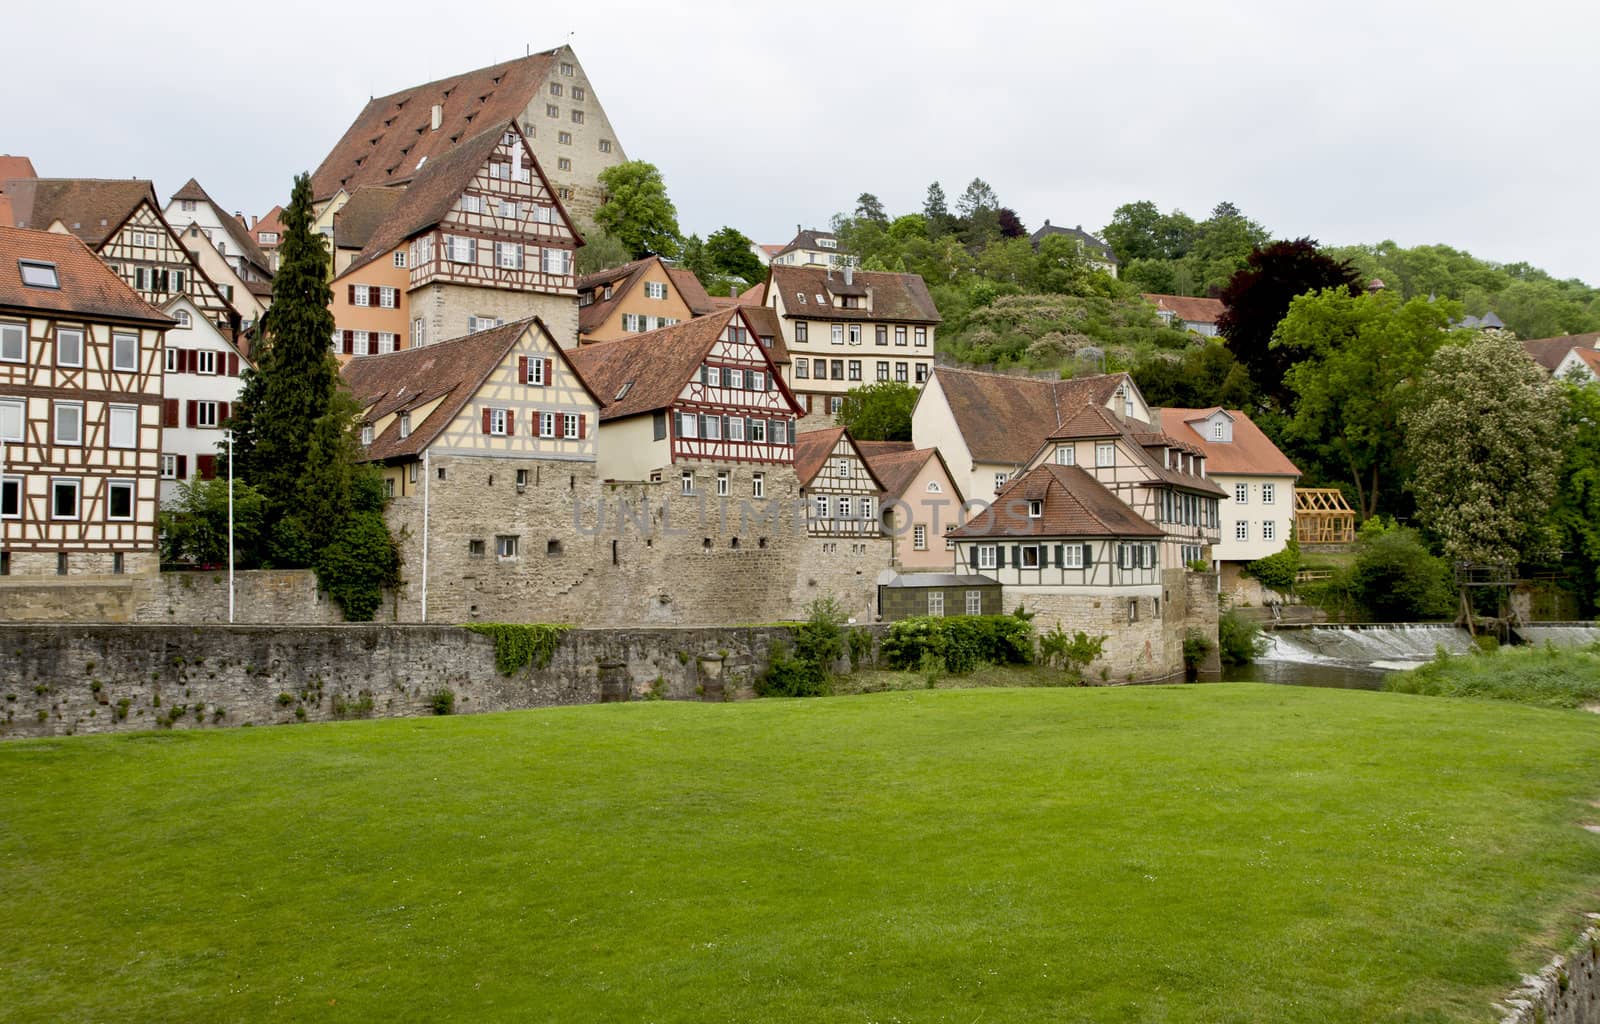 historic city in south west germany with lawn